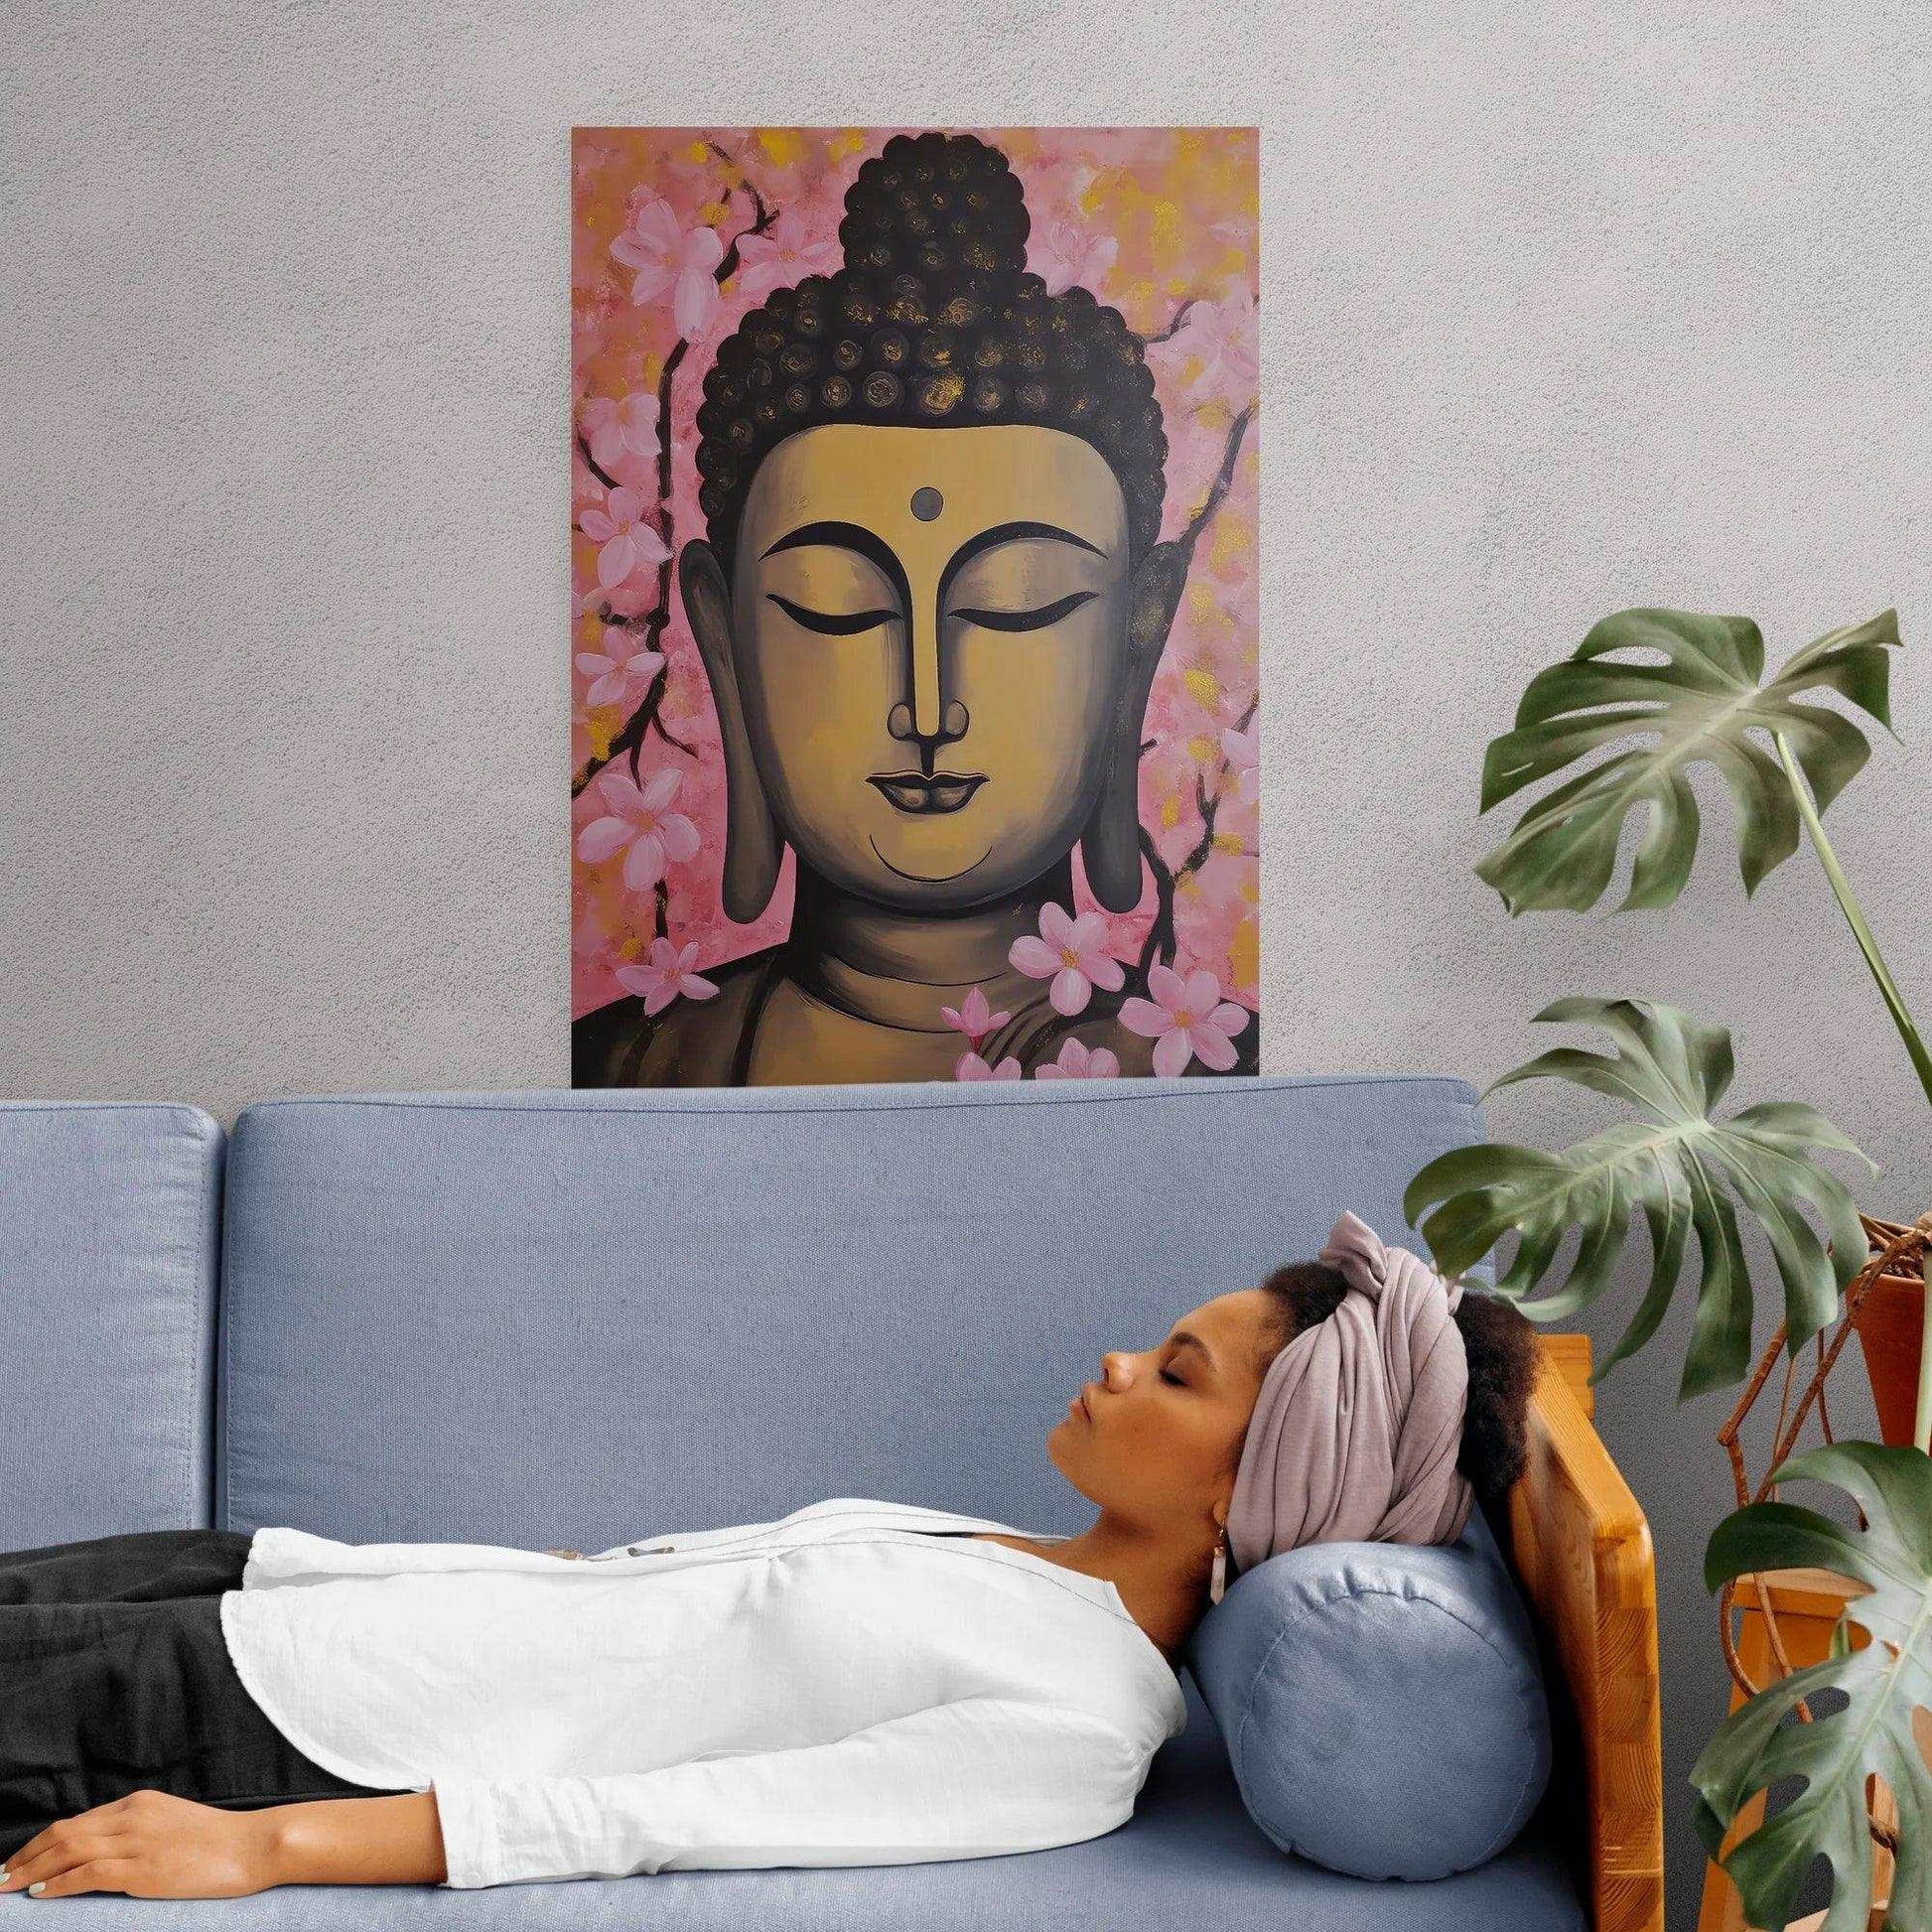 Tranquil Buddha painting with soft pink cherry blossoms on a yellow backdrop, adorning a living room wall above a relaxing woman lying on a blue sofa, with a lush green plant beside her, evoking a calming and meditative space.